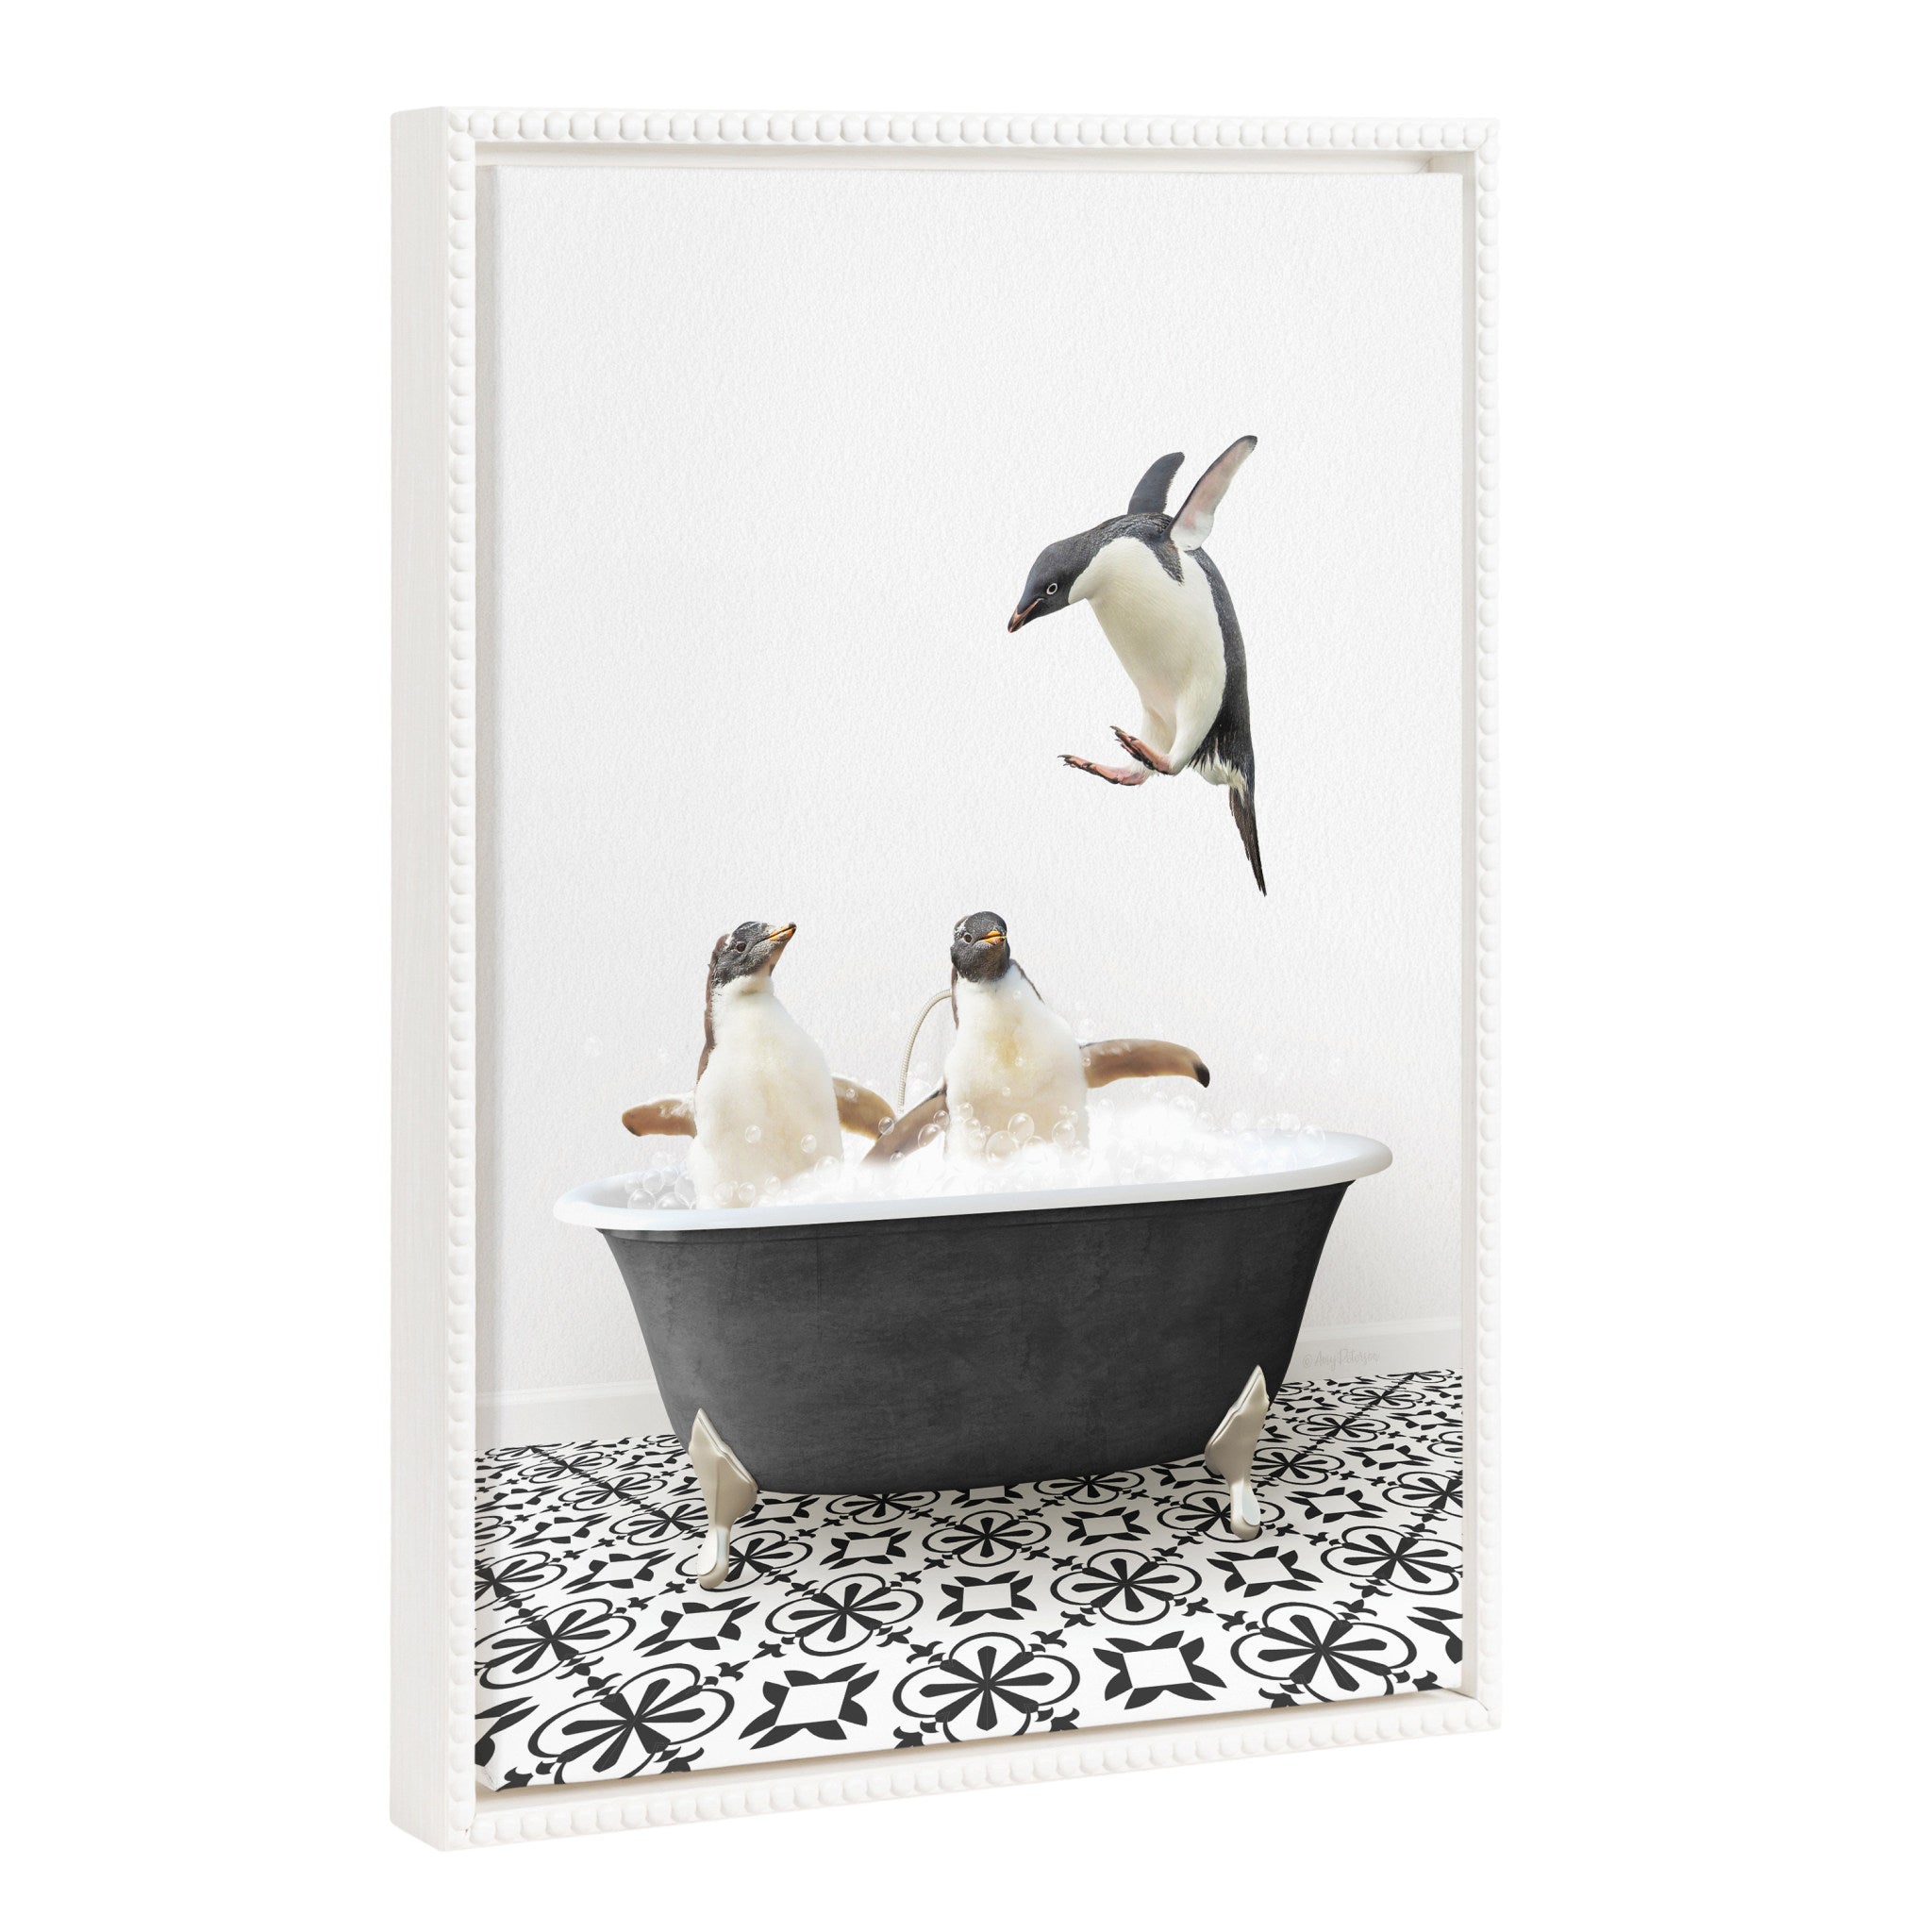 Sylvie Beaded Penguins in Black and White Stencil Bath Framed Canvas by Amy Peterson